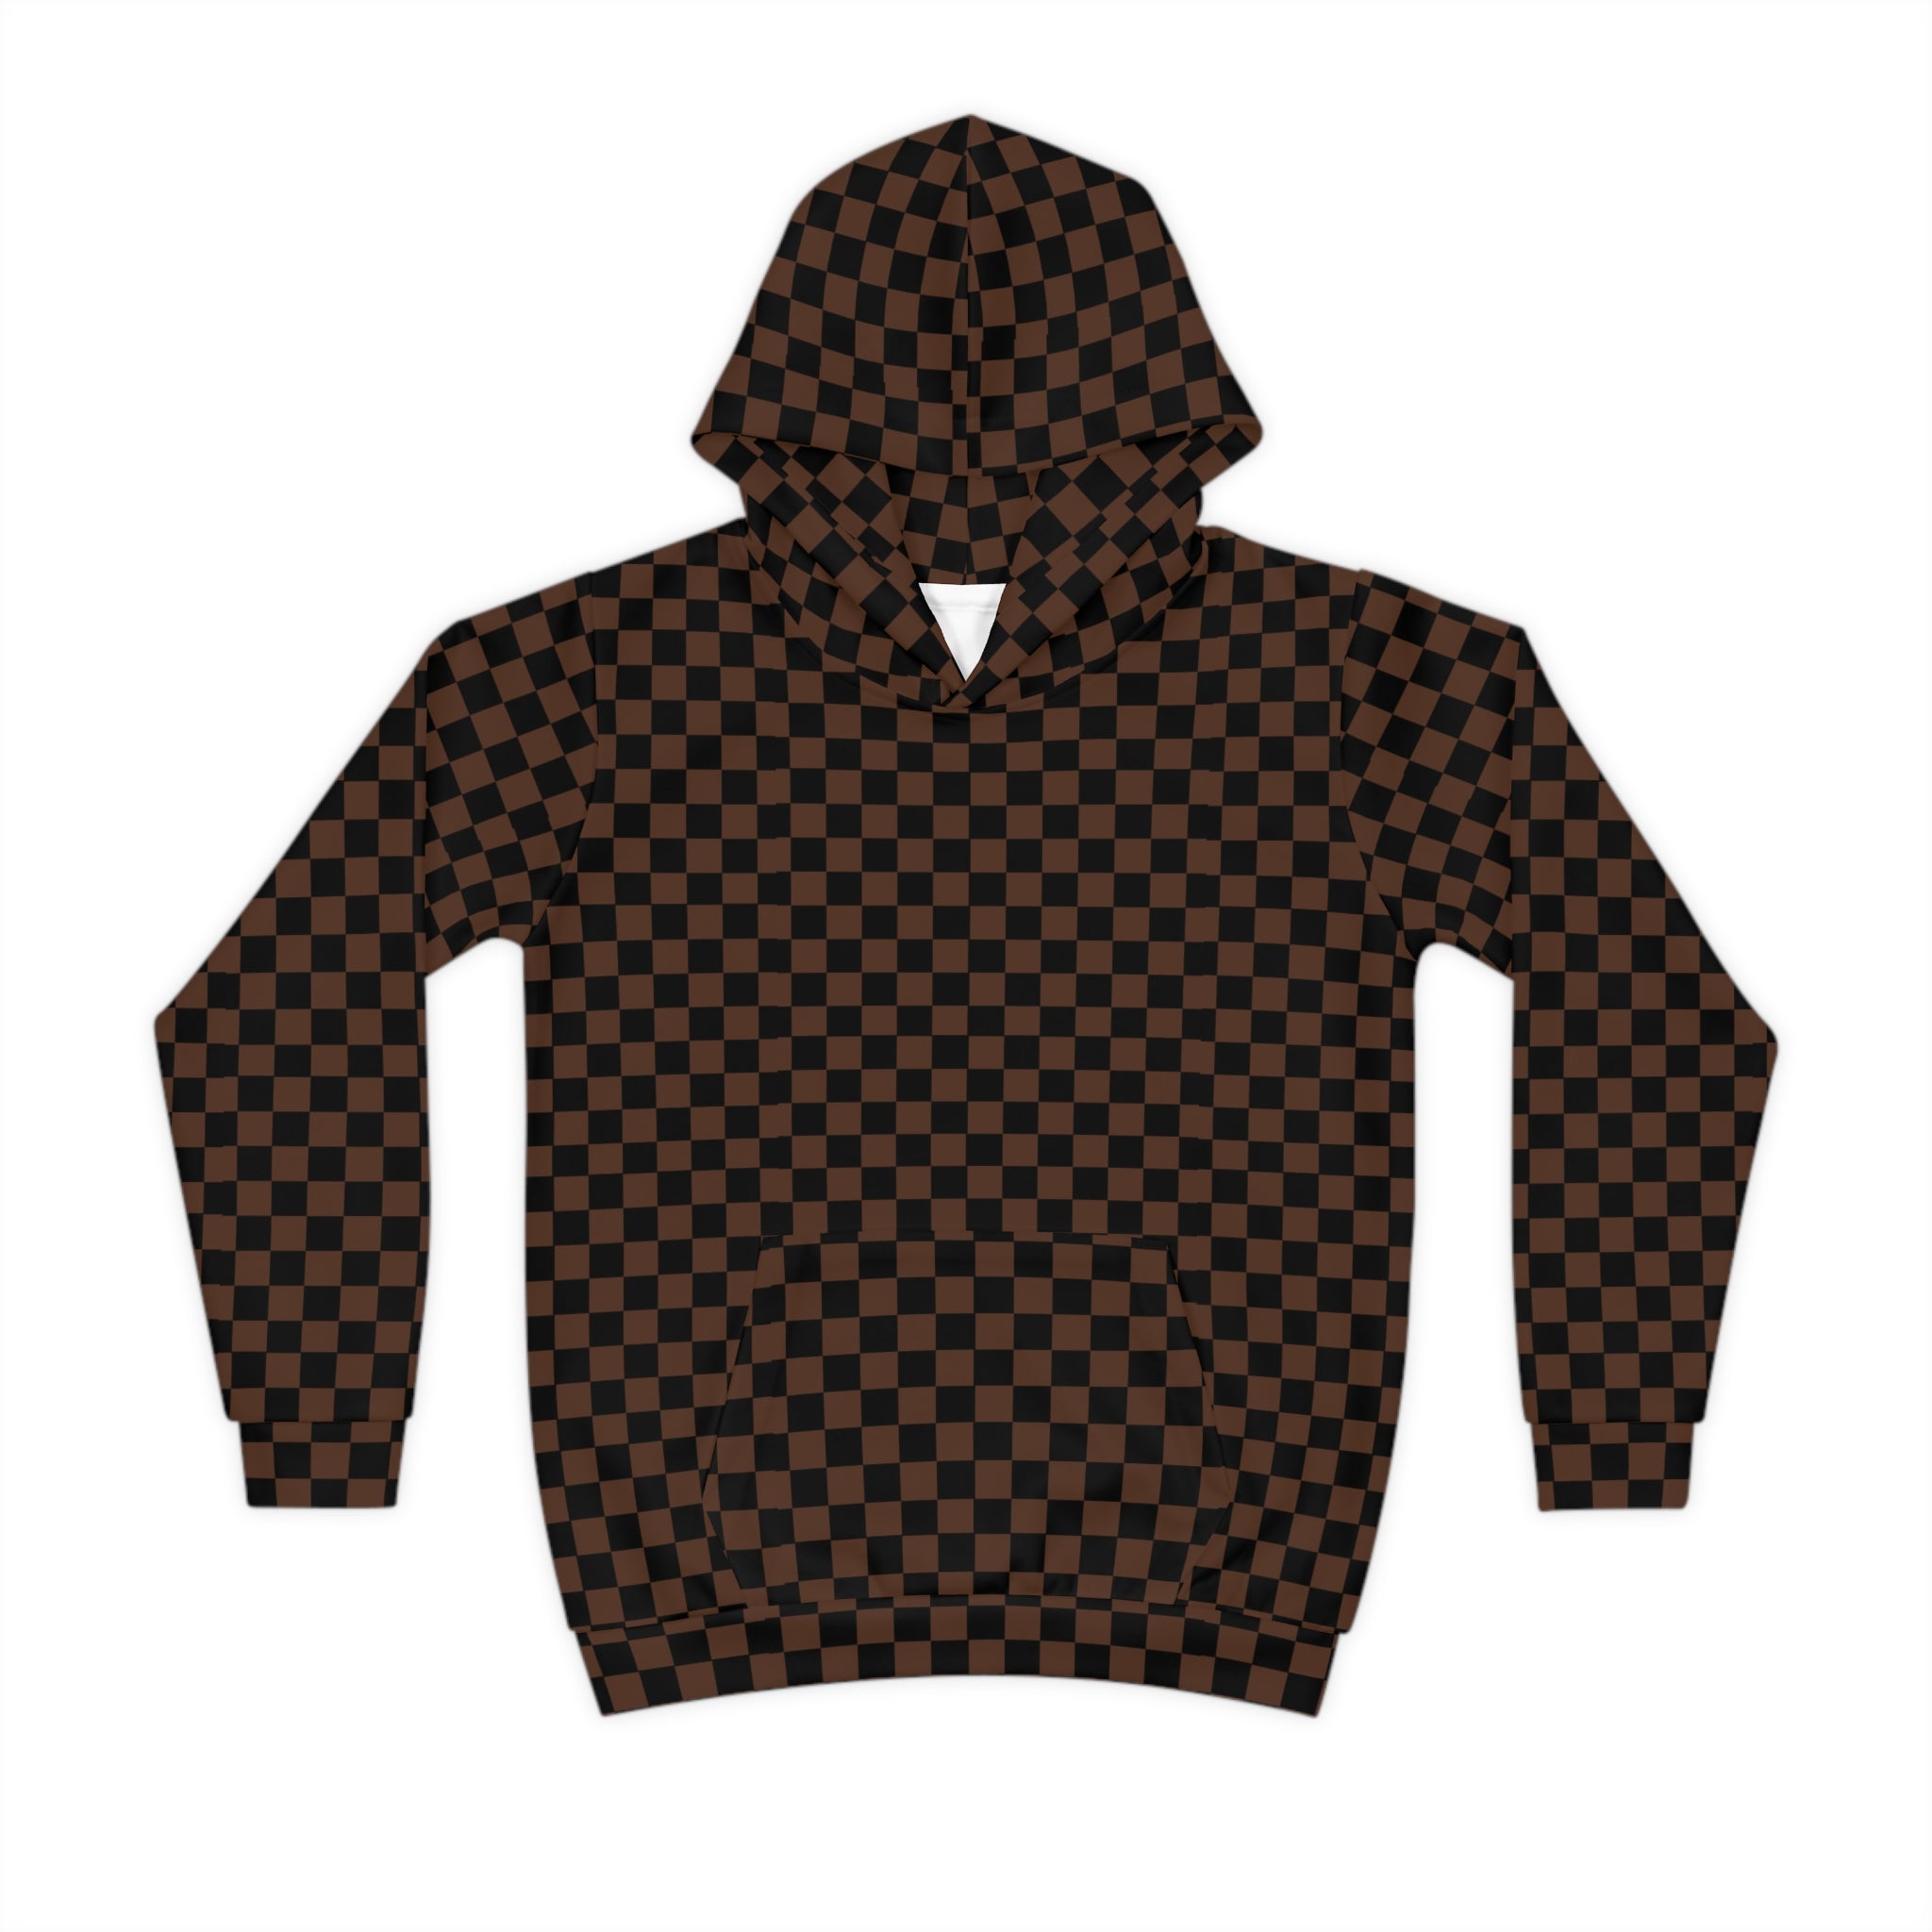 Brown Check Mate Children's Hoodie, Pullover Sweater for Children, Kids Fashionwear - The Middle Aged Groove